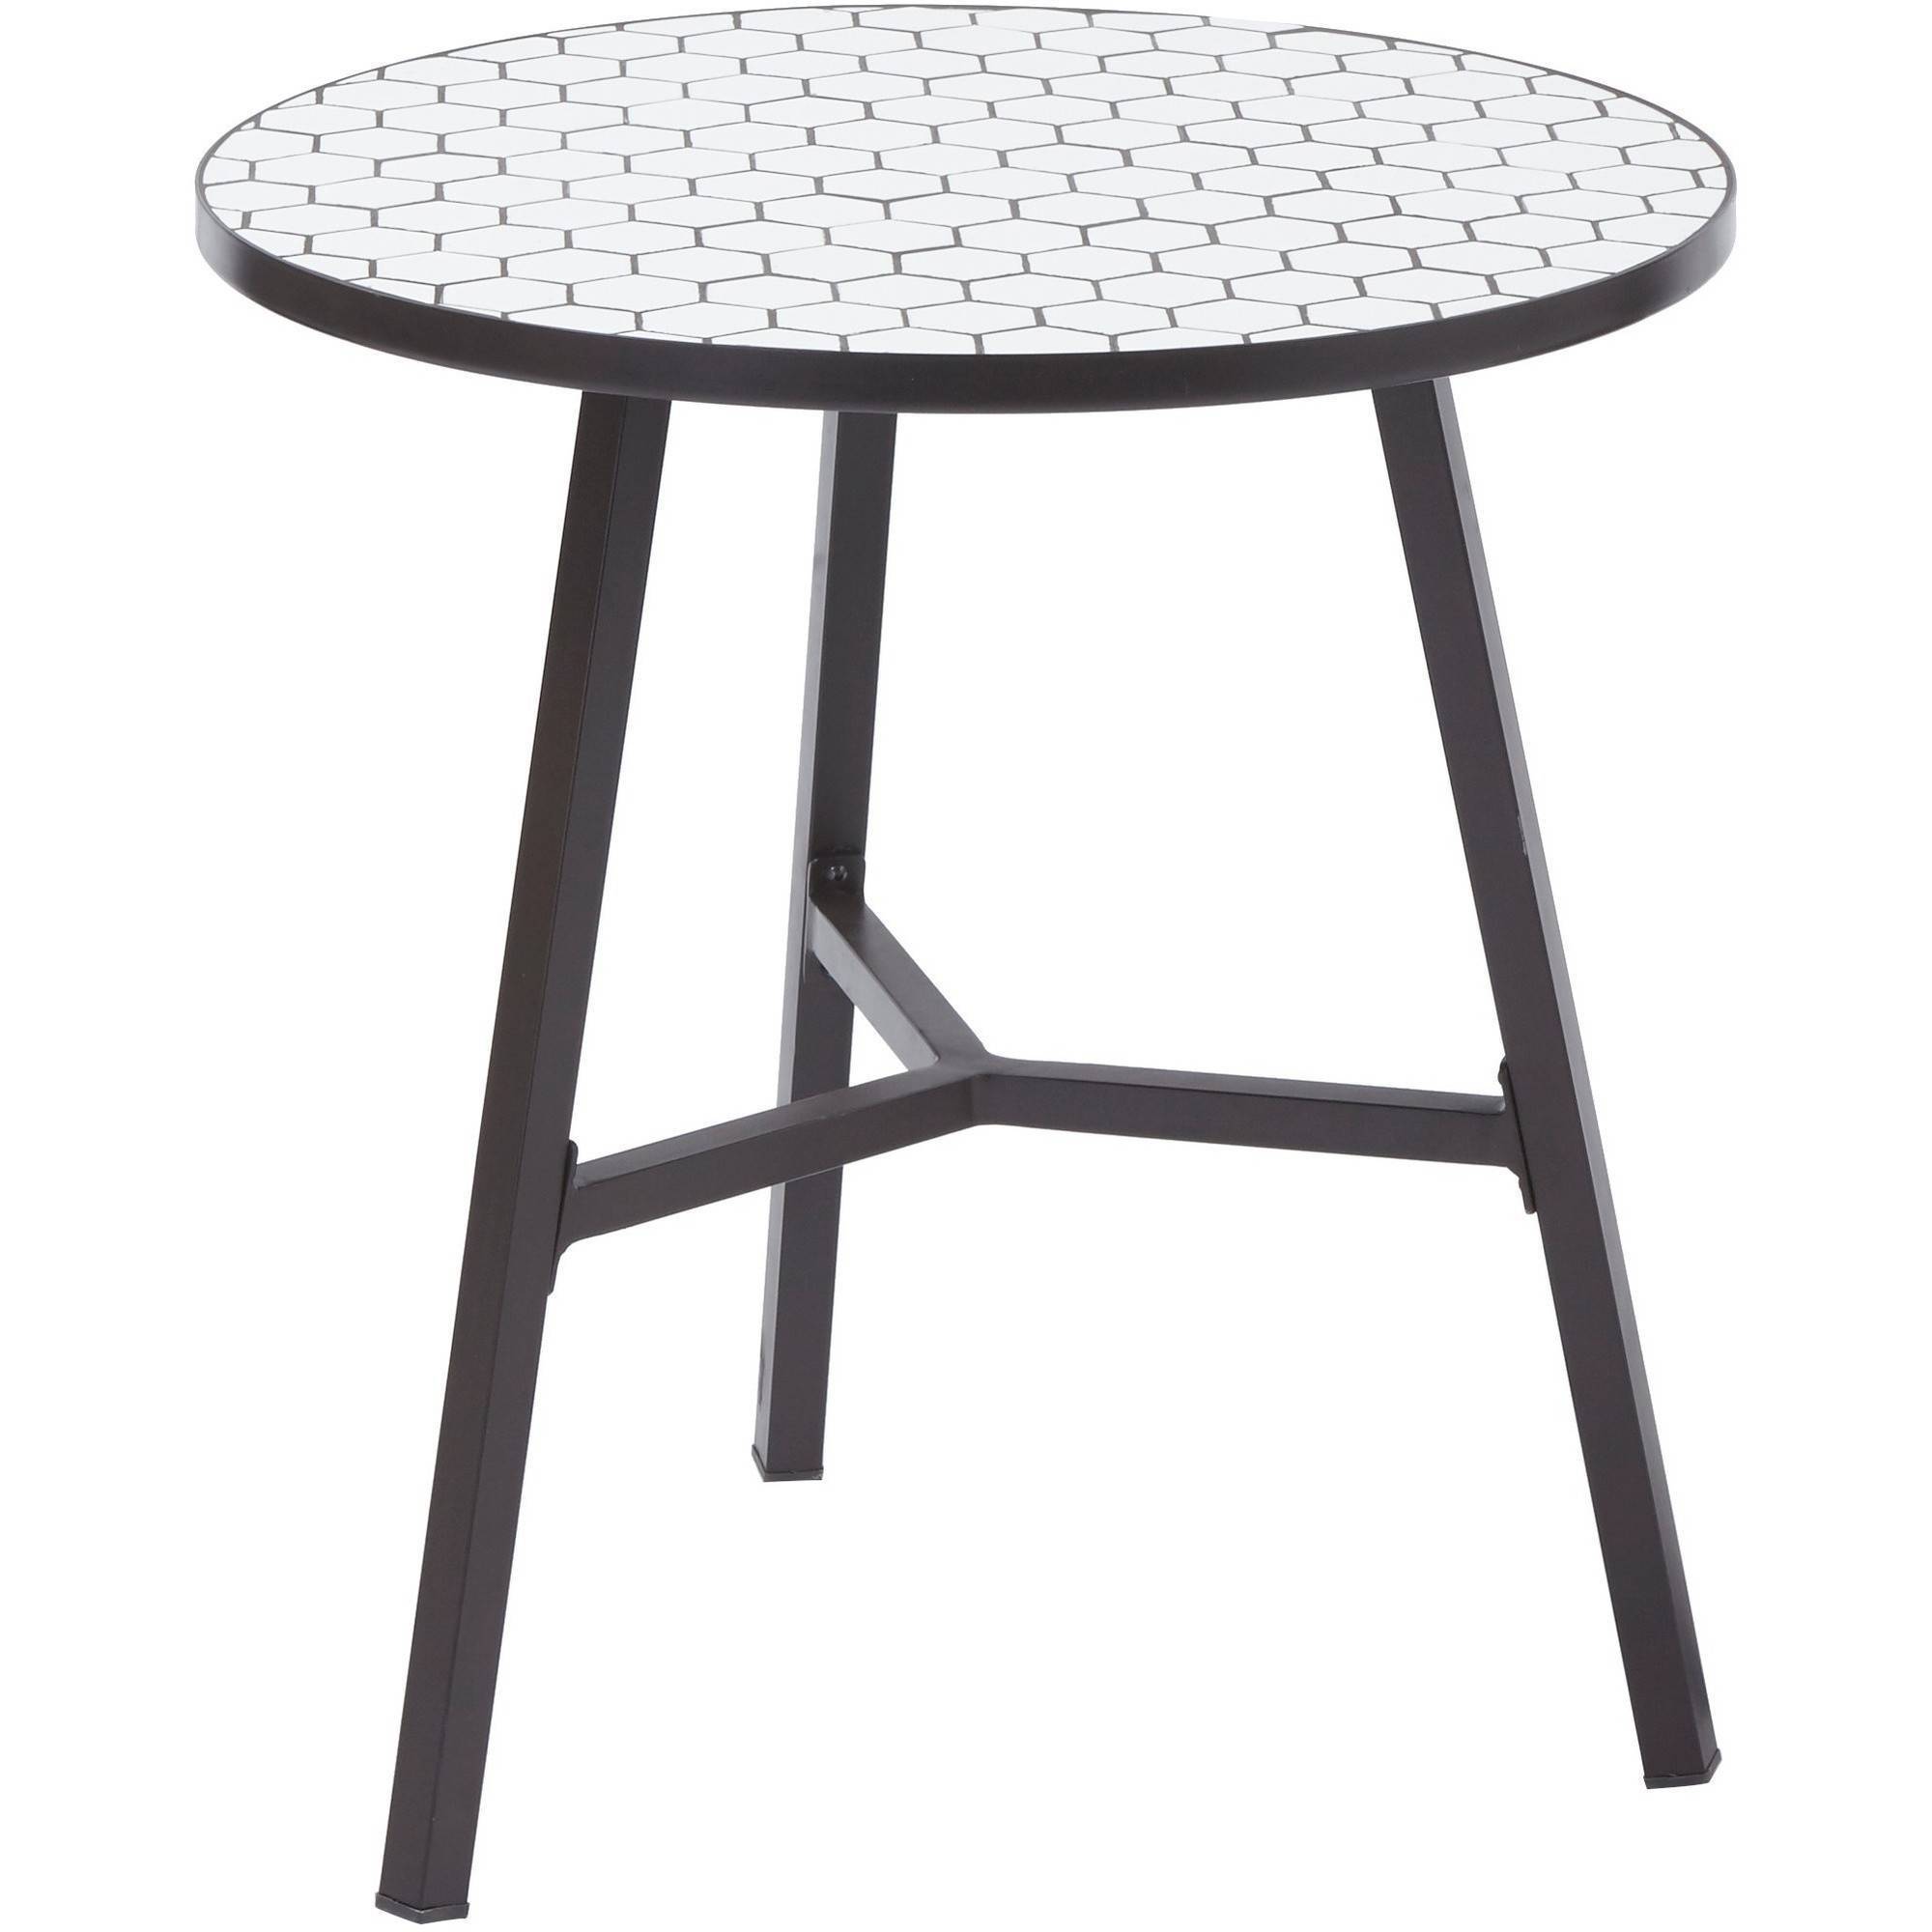 outdoor table and chairs patio furniture - walmart.com RPMGVMJ